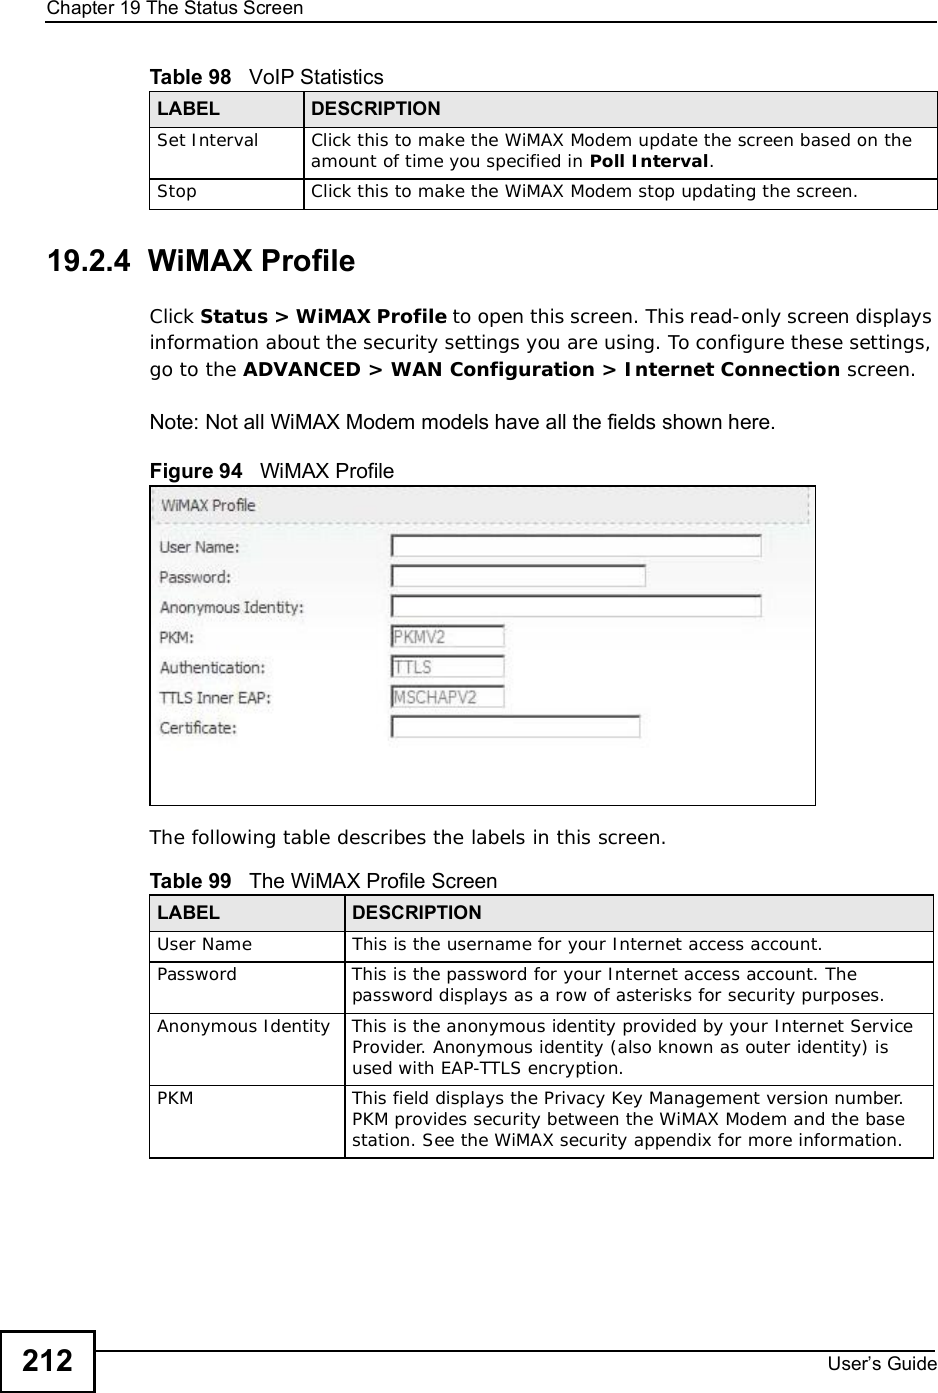 Chapter 19The Status ScreenUser s Guide21219.2.4  WiMAX ProfileClick Status &gt; WiMAX Profile to open this screen. This read-only screen displays information about the security settings you are using. To configure these settings, go to the ADVANCED &gt; WAN Configuration &gt; Internet Connection screen.Note: Not all WiMAX Modem models have all the fields shown here.Figure 94   WiMAX Profile The following table describes the labels in this screen.Set IntervalClick this to make the WiMAX Modem update the screen based on the amount of time you specified in Poll Interval.StopClick this to make the WiMAX Modem stop updating the screen.Table 98   VoIP Statistics LABEL DESCRIPTIONTable 99   The WiMAX Profile ScreenLABEL DESCRIPTIONUser NameThis is the username for your Internet access account. PasswordThis is the password for your Internet access account. The password displays as a row of asterisks for security purposes.Anonymous IdentityThis is the anonymous identity provided by your Internet Service Provider. Anonymous identity (also known as outer identity) is used with EAP-TTLS encryption.PKMThis field displays the Privacy Key Management version number. PKM provides security between the WiMAX Modem and the base station. See the WiMAX security appendix for more information.